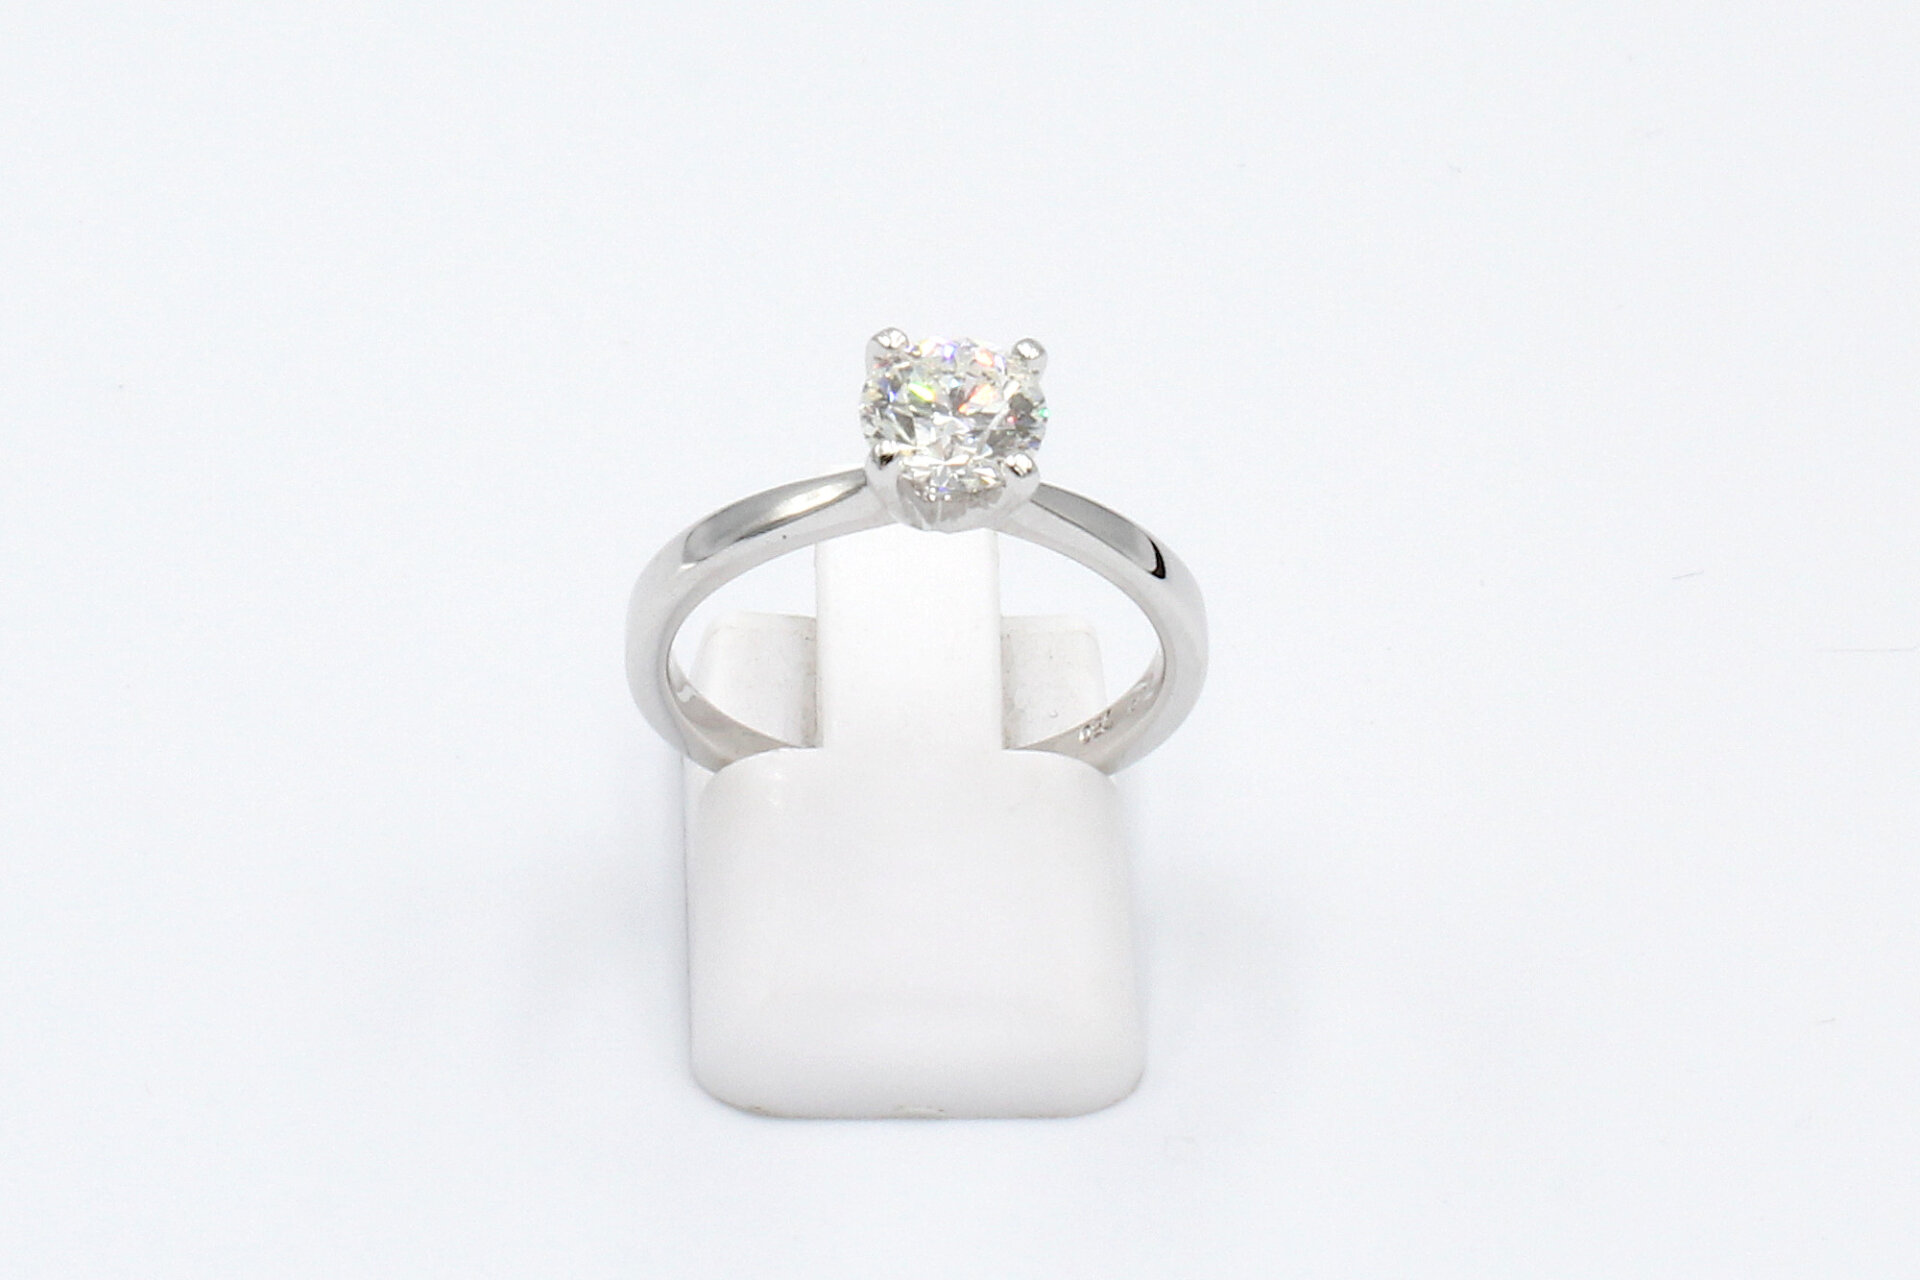 top view of a white gold solitaire diamond engagement ring